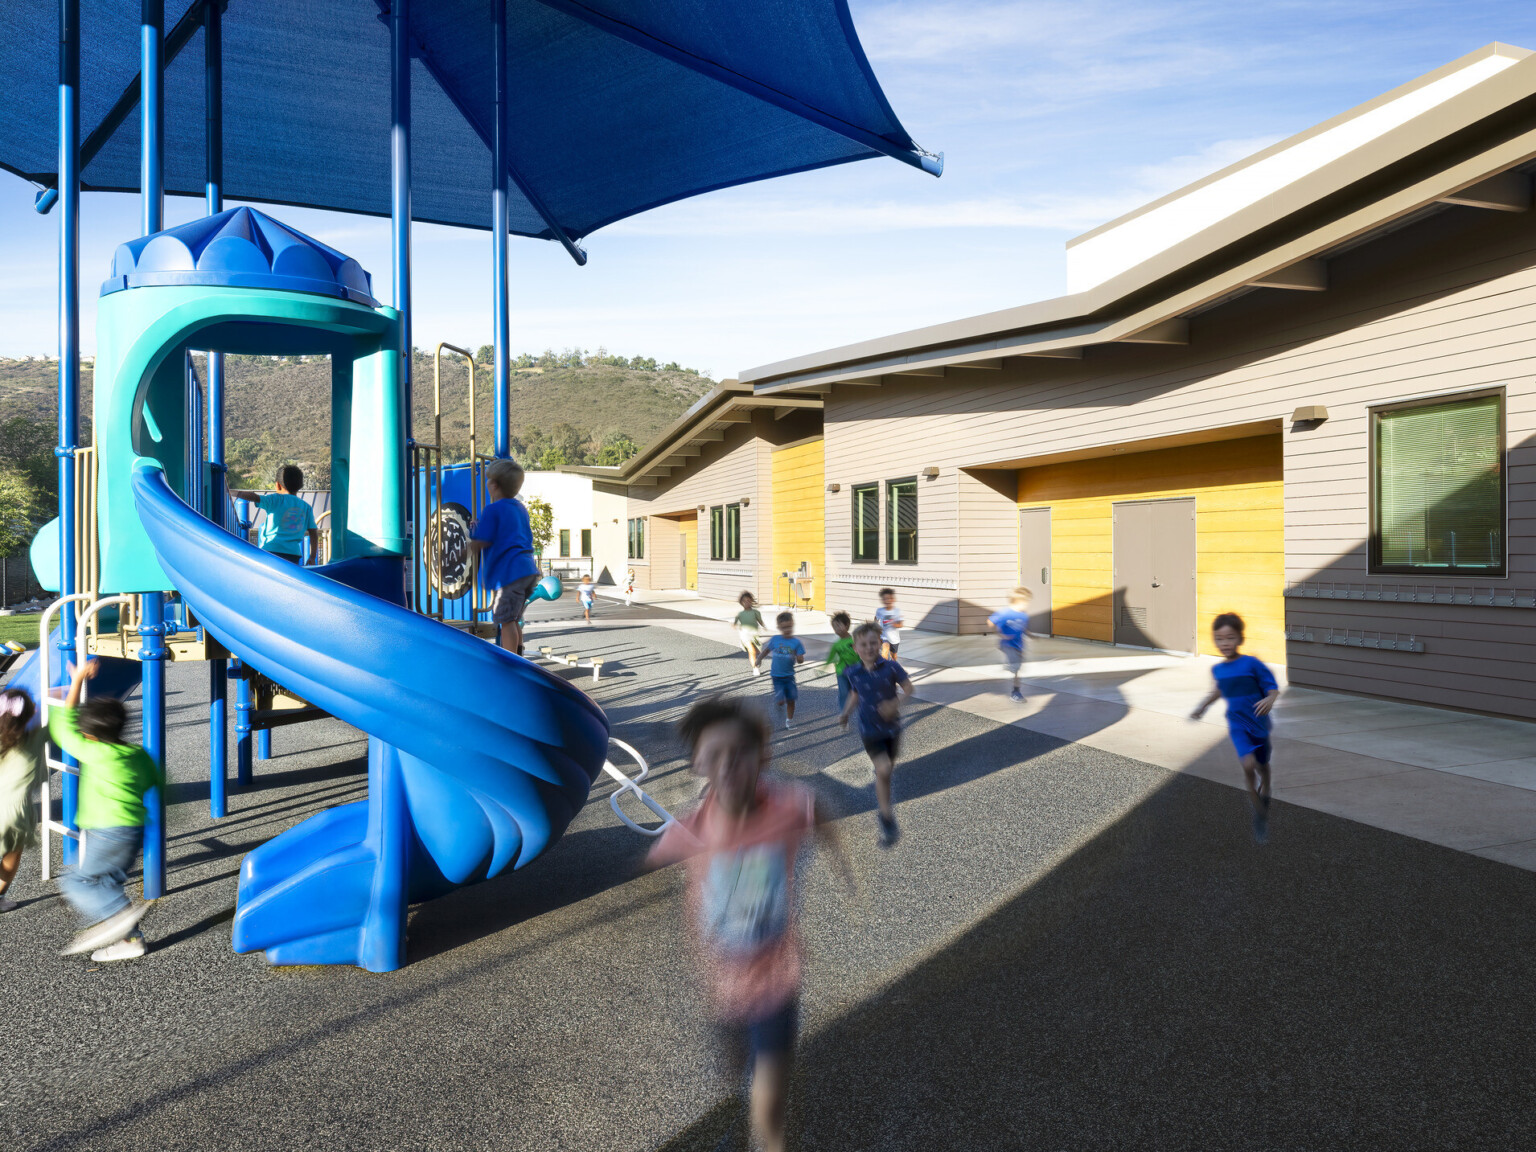 Single story angular roof building next to elementary school playground with blue canopied slide